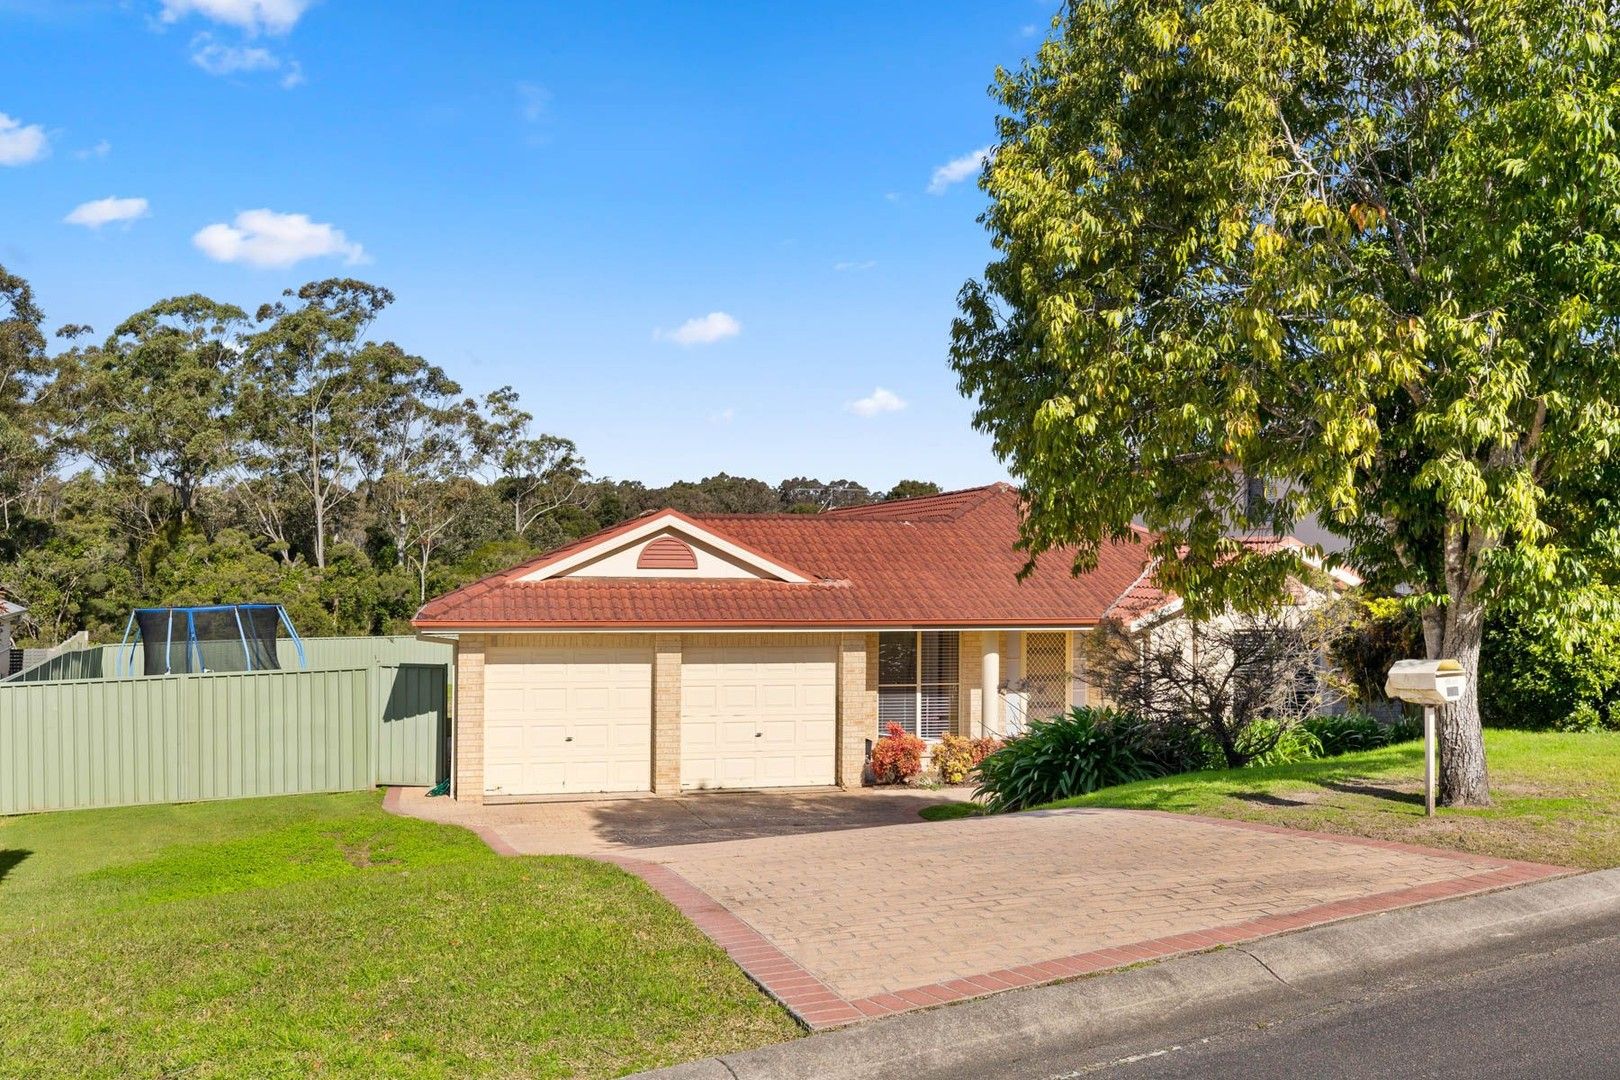 4 bedrooms House in 67 Ballydoyle Drive ASHTONFIELD NSW, 2323